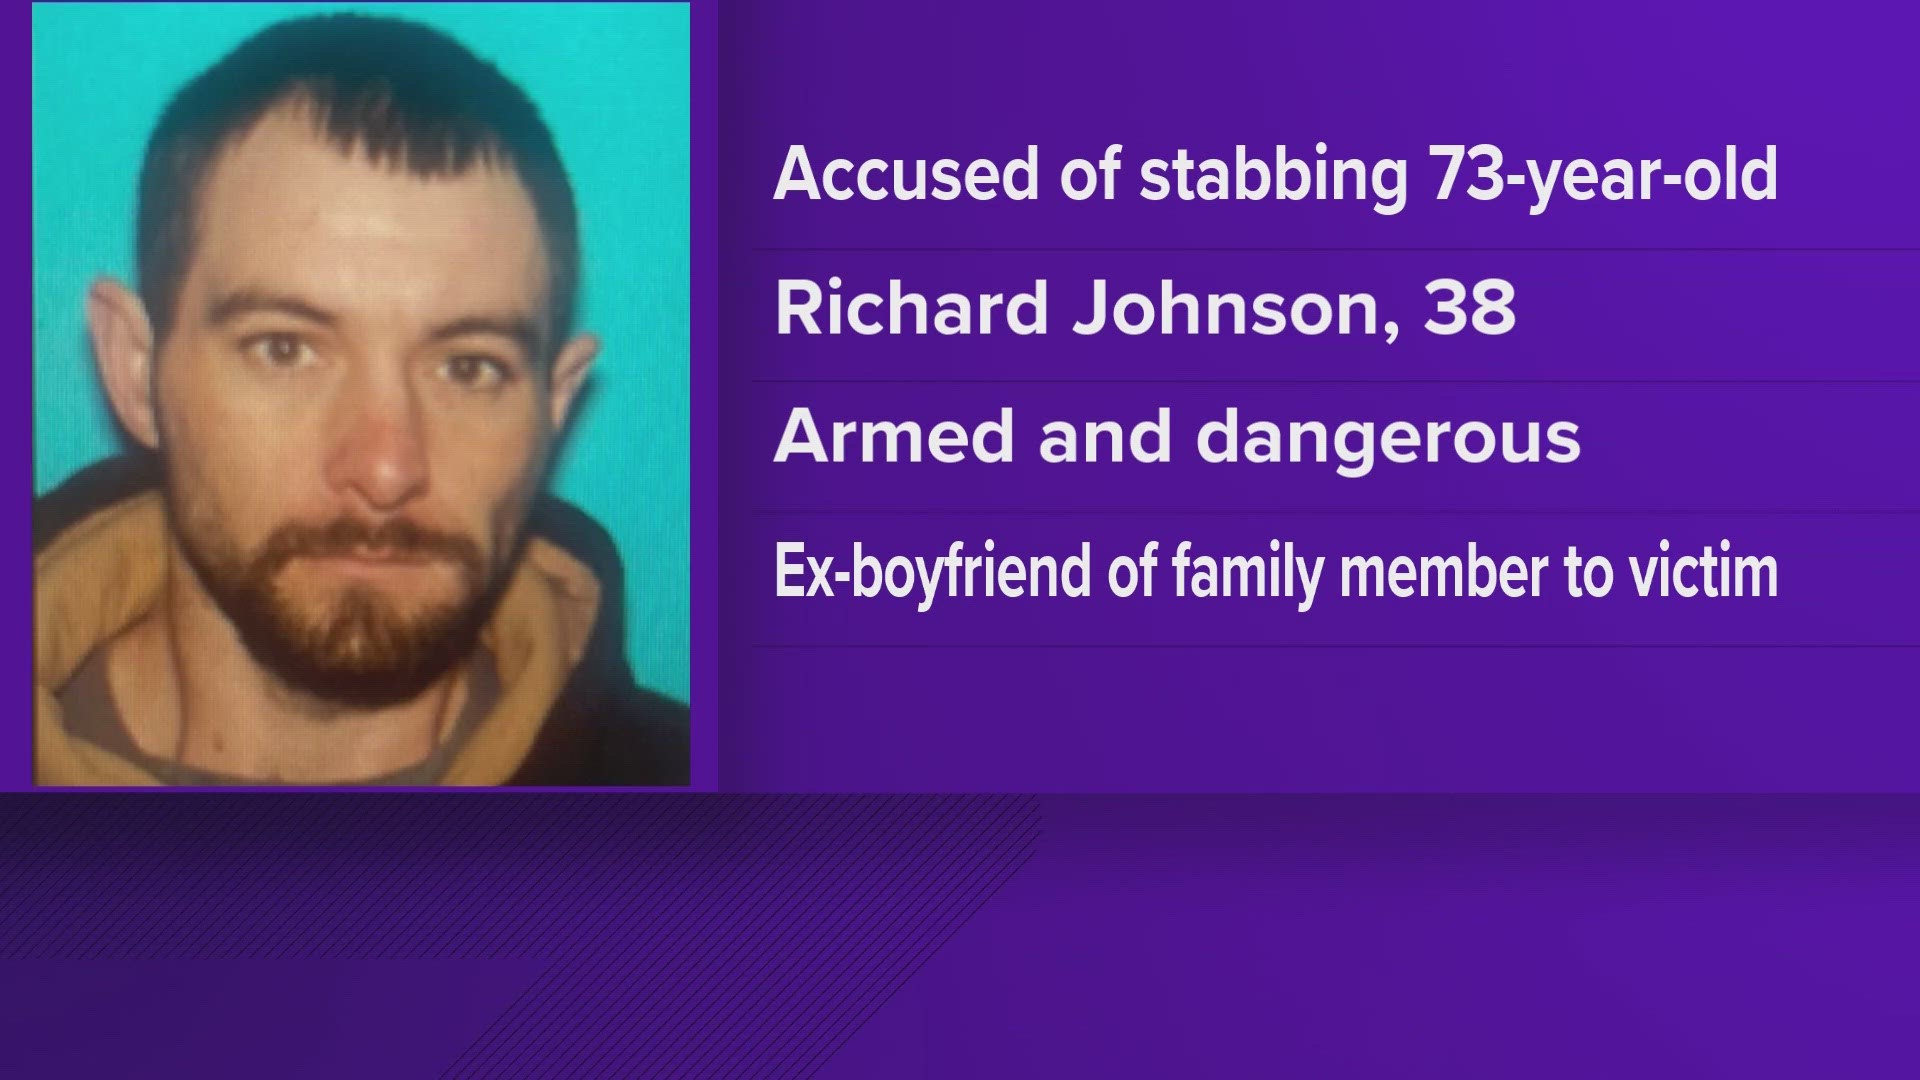 The man, Richard Johnson, is considered armed and dangerous. Deputies said he was an ex-boyfriend of a family member of the victim.